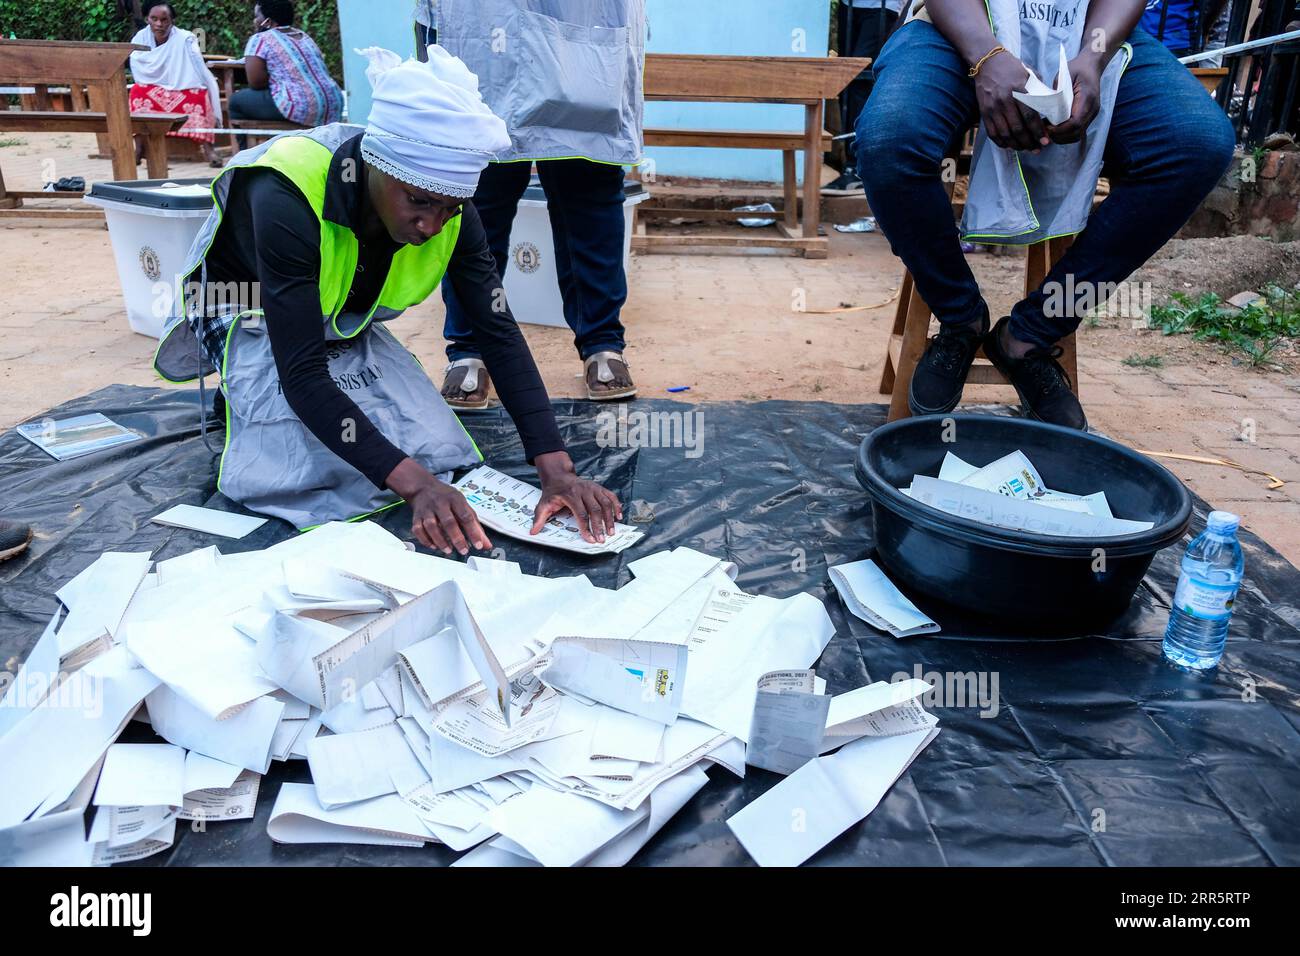 210114 -- NAJJERA UGANDA, Jan. 14, 2021 -- A staff member arranges ballots at a polling station in Najjera, Wakiso District, Uganda, on Jan. 14, 2021. Vote counting in Uganda s Thursday presidential and parliamentary elections has started with the country s electoral body saying results are expected to be released in 48 hours. Photo by /Xinhua UGANDA-NAJJERA-GENERAL ELECTIONS-VOTE COUNTING HajarahxNalwadda PUBLICATIONxNOTxINxCHN Stock Photo